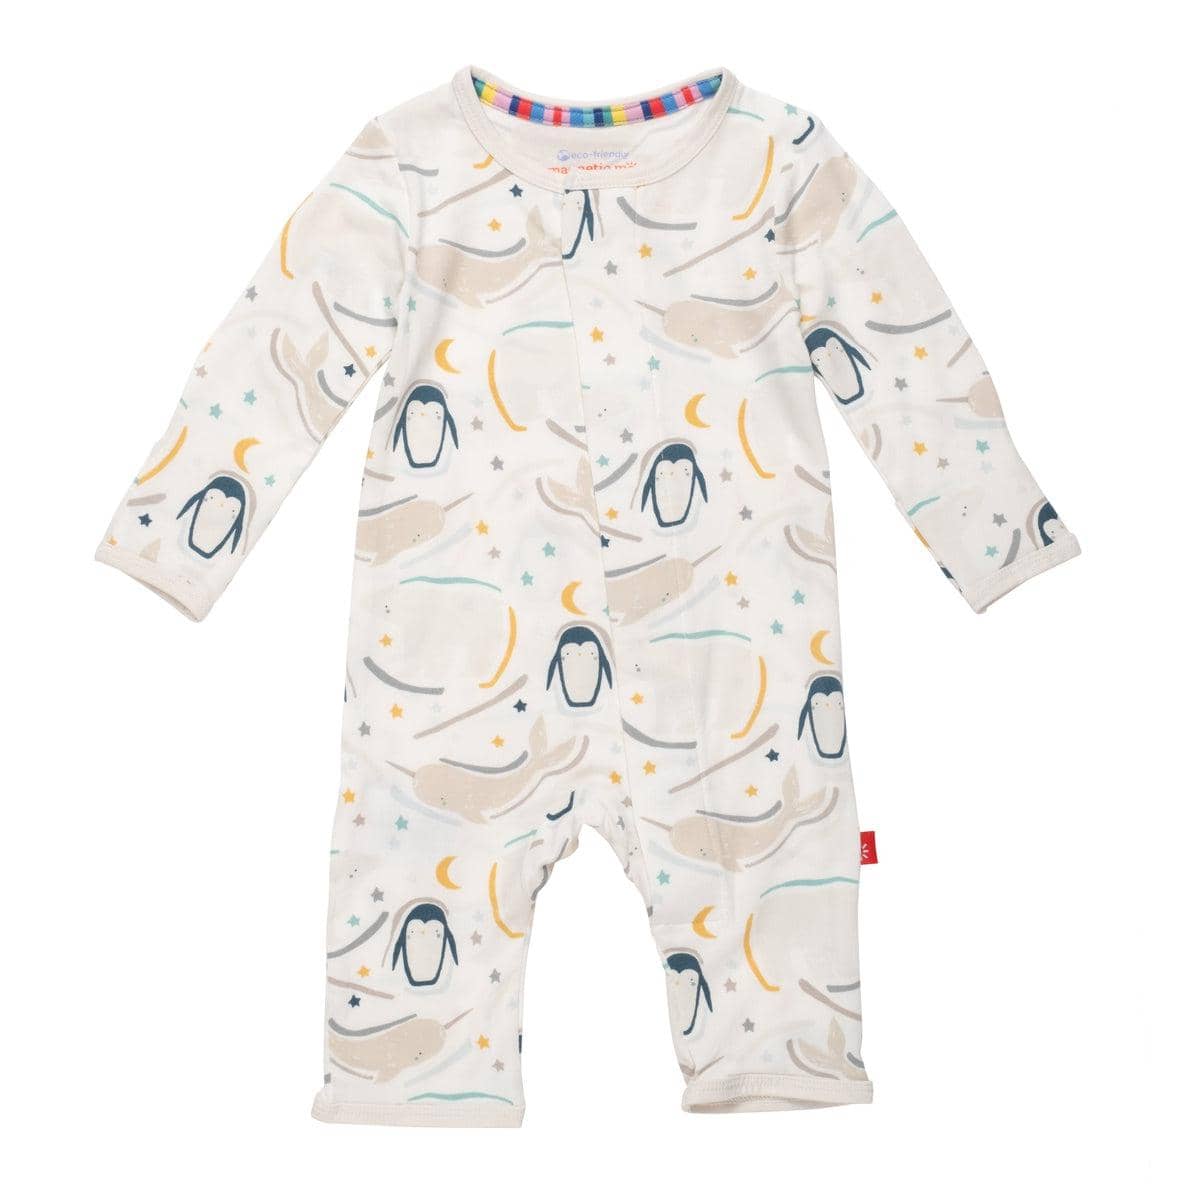 A coverall Boutique – Love Whale You magnetic January Wish